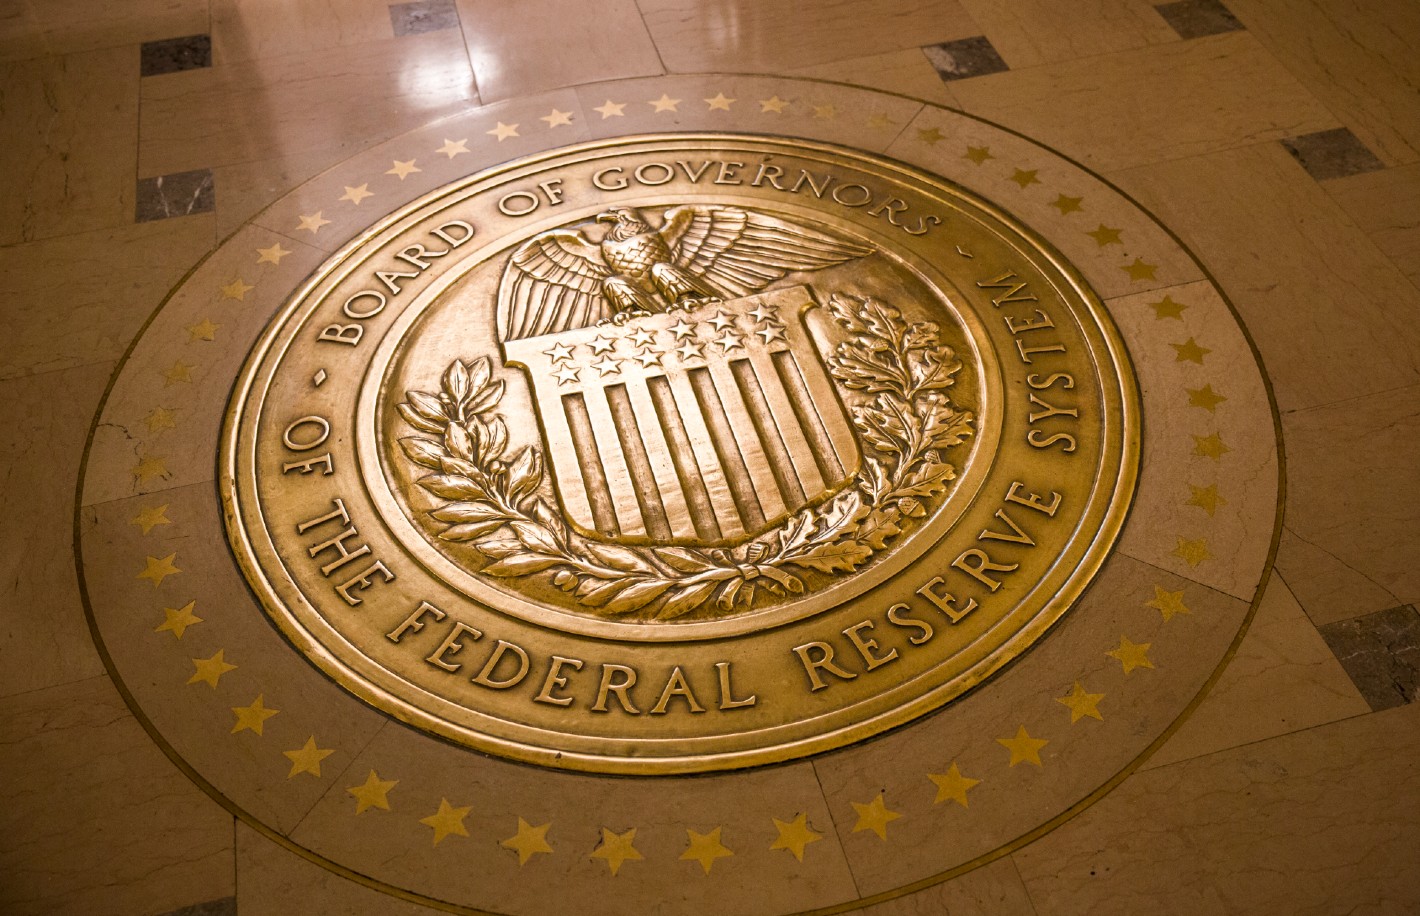 Crypto-long-&-short:-what-changes-at-the-fed-and-the-sec-mean-for-crypto